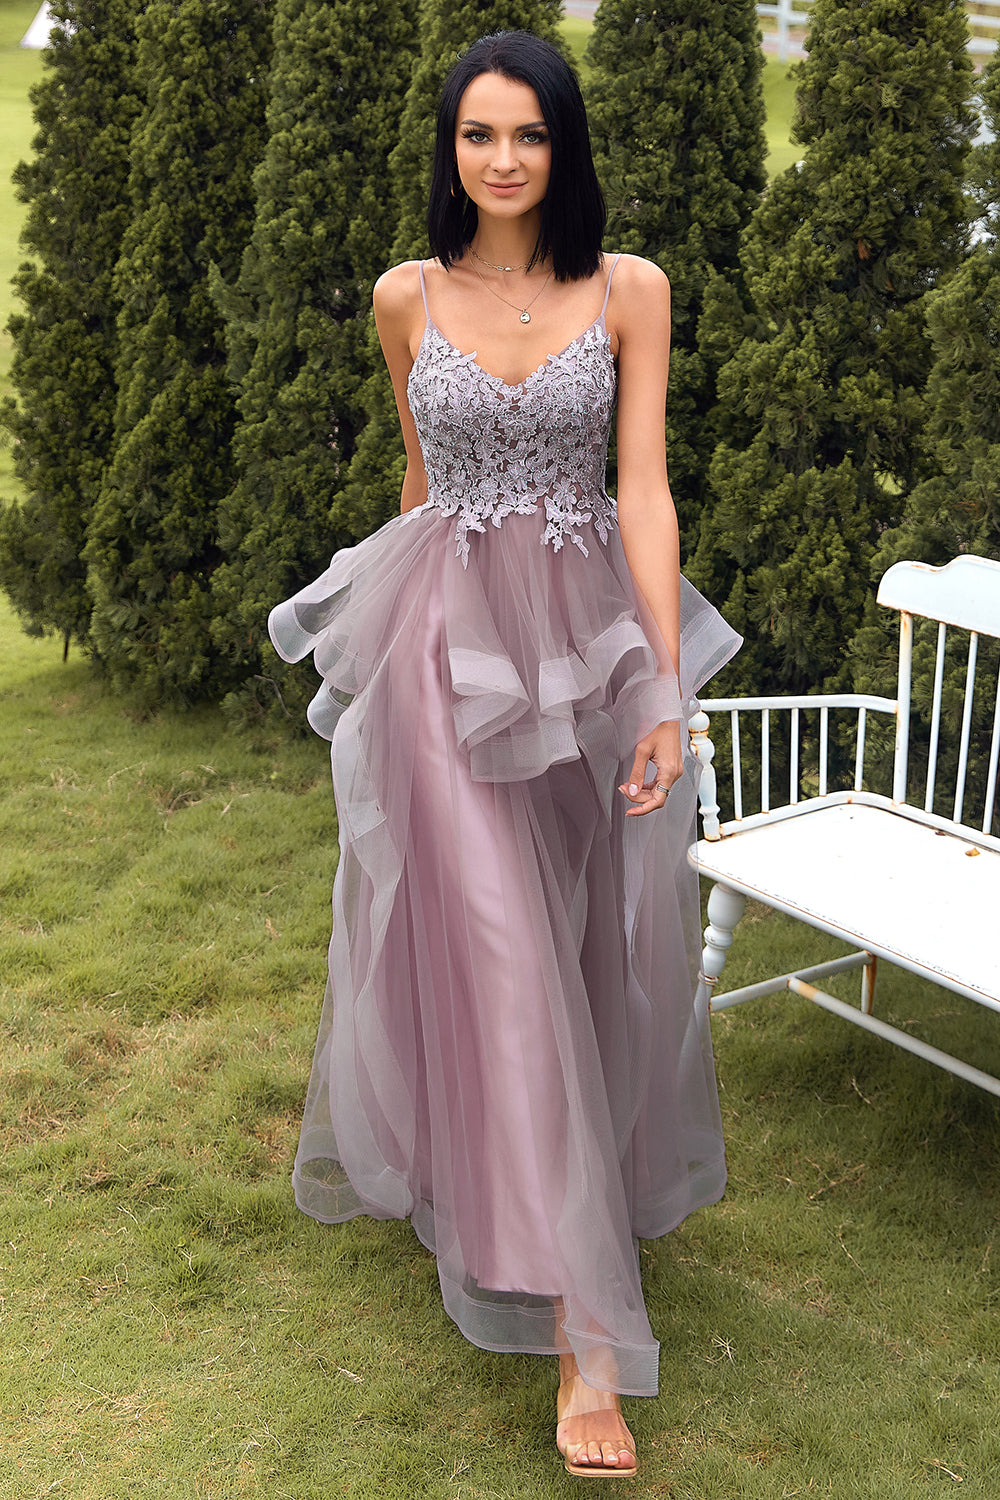 A-Line Spaghetti Straps Purple Grey Long Formal Dress with Appliques